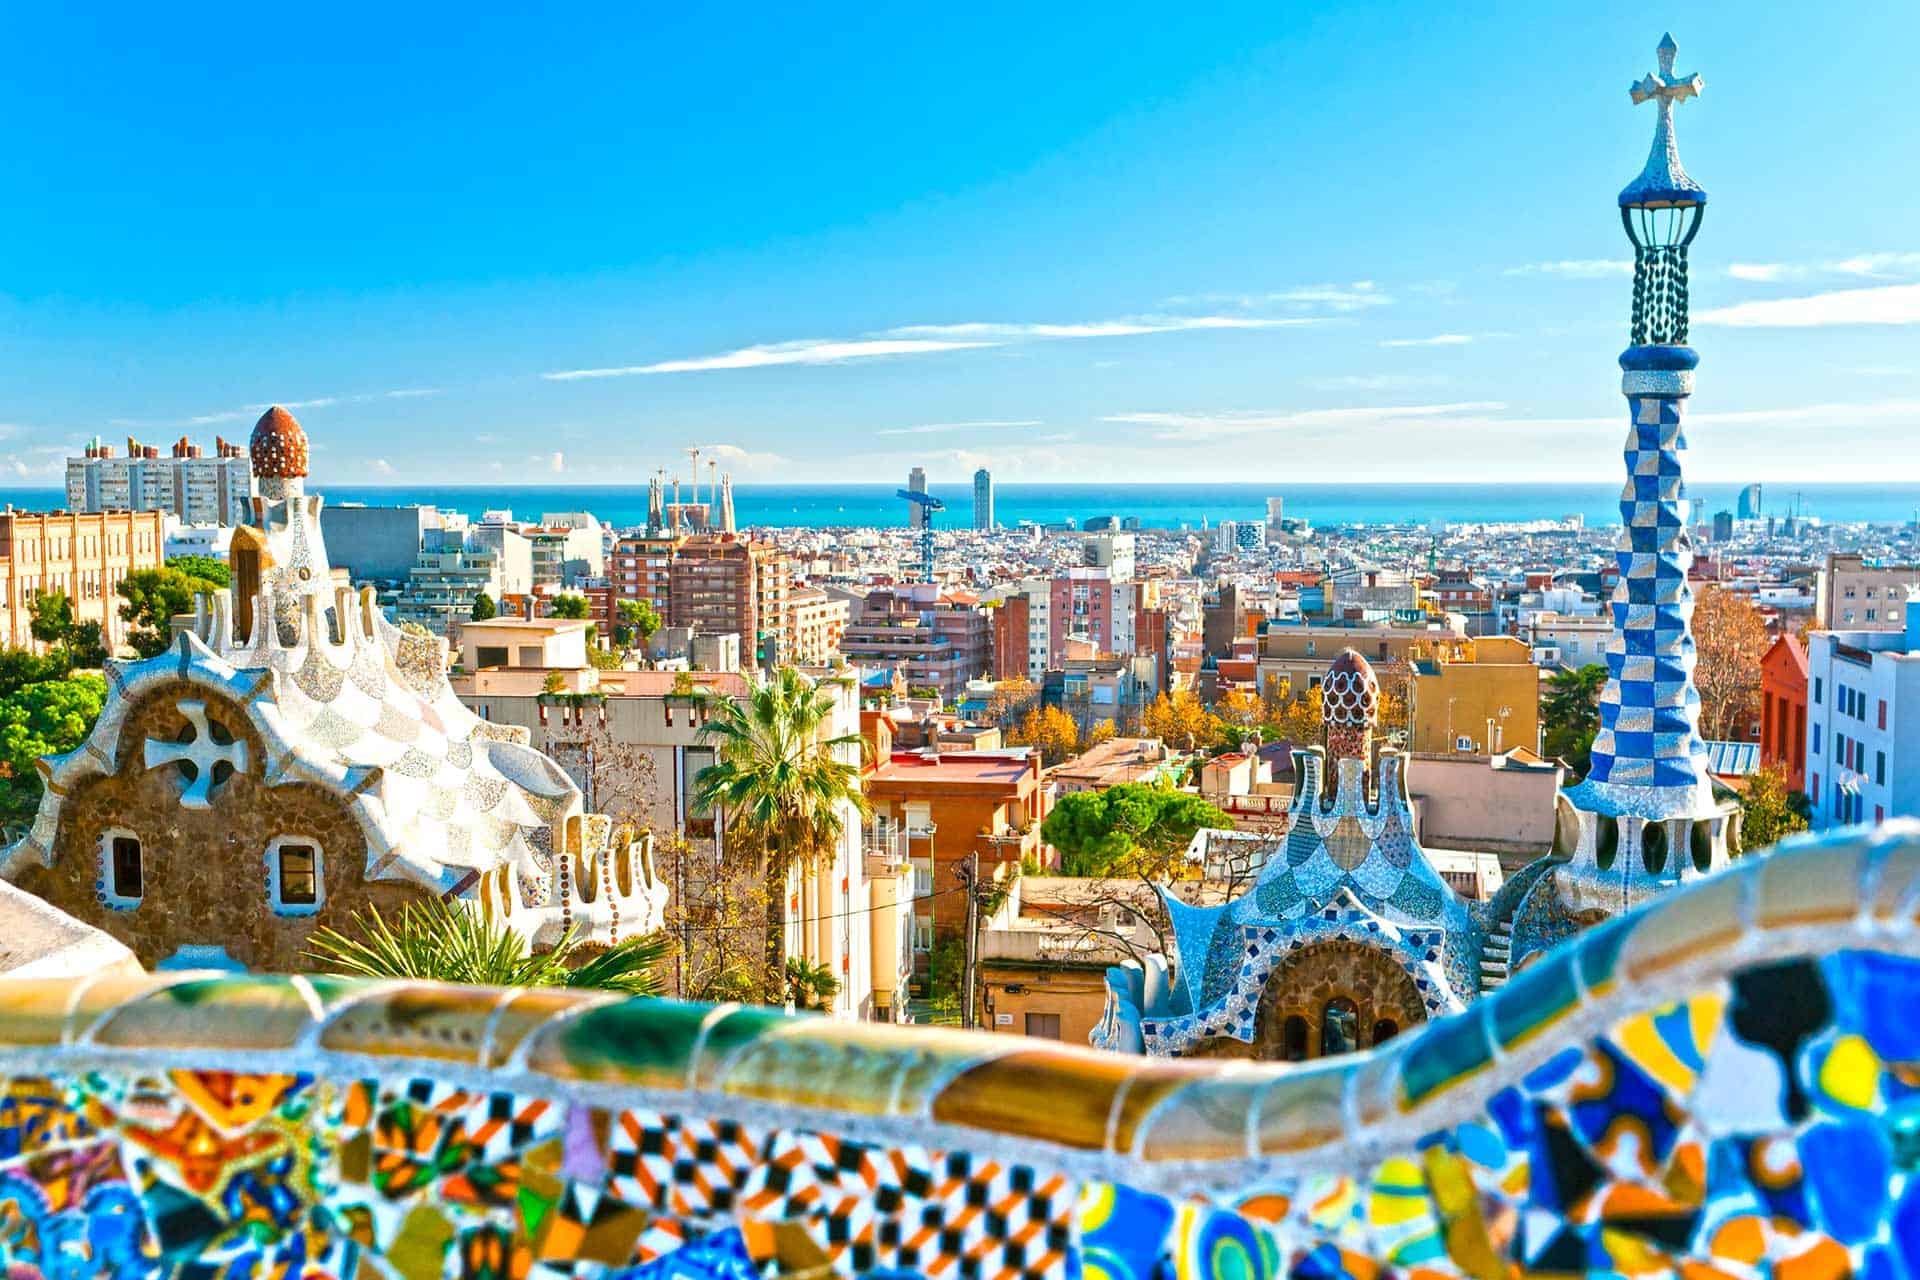 A view over Barcelona from Parc Guell